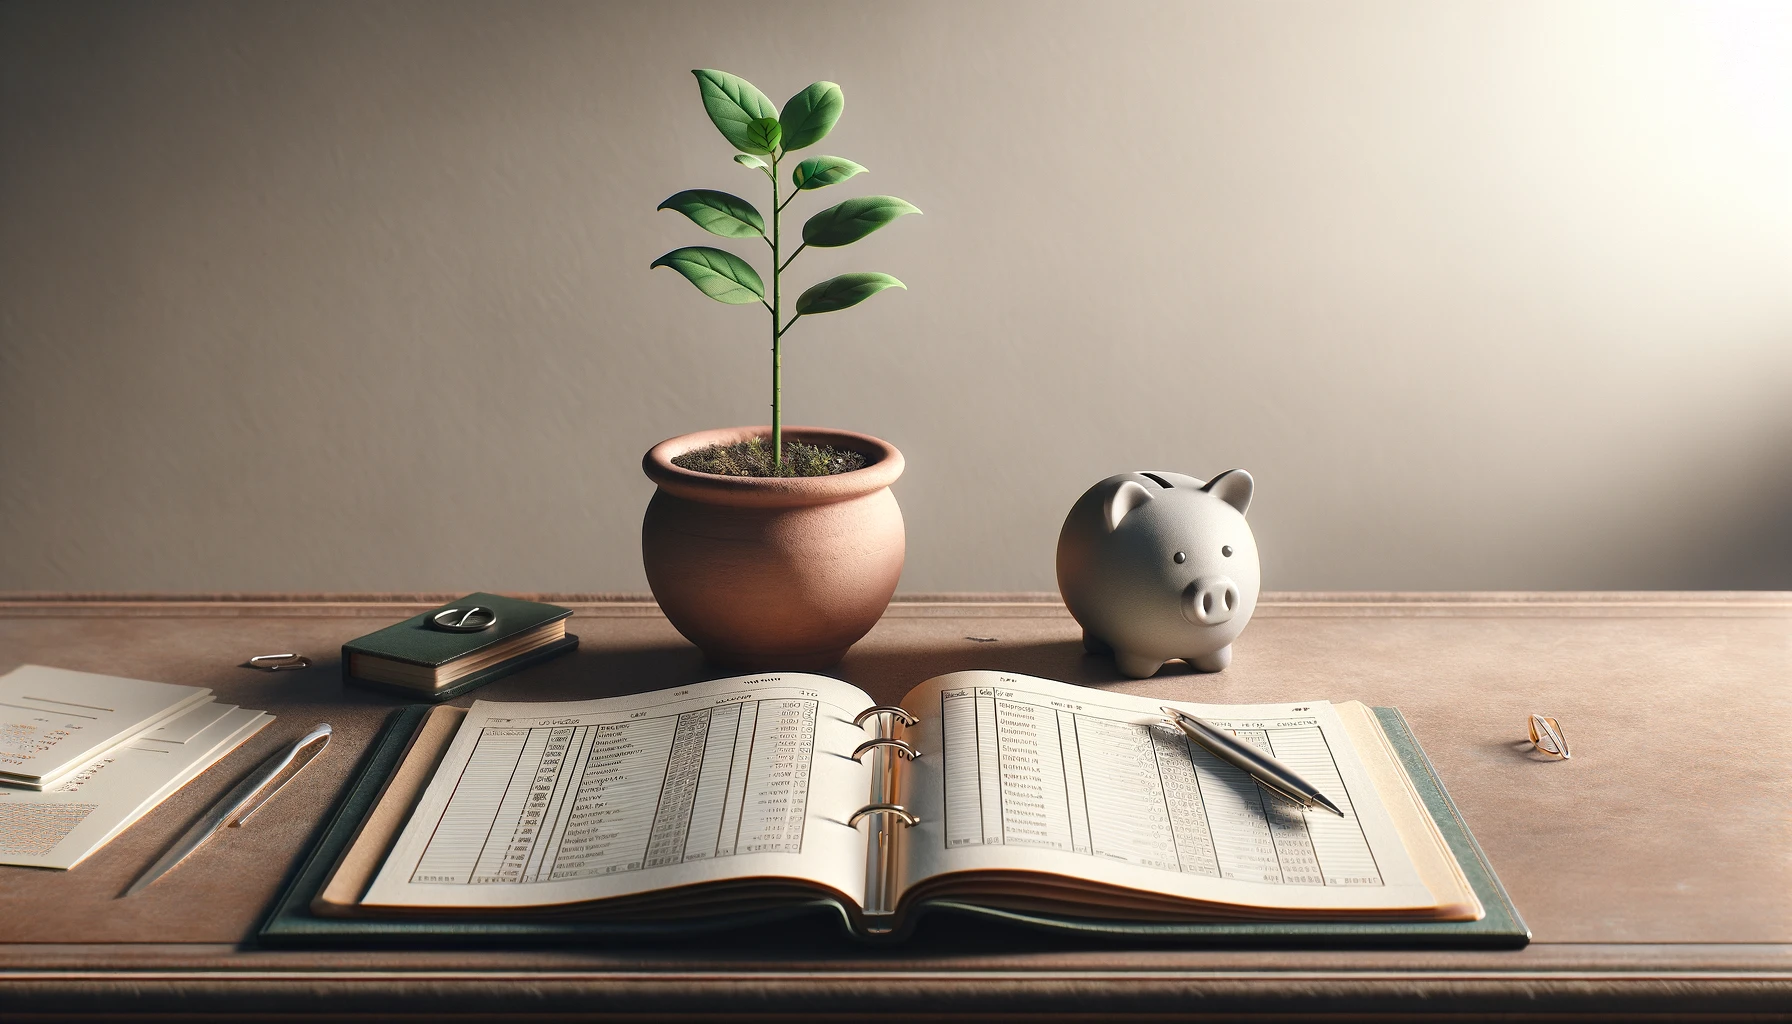 A simple desk with an open ledger on investment strategies, a ceramic piggy bank, and a sapling in a terracotta pot, embodying careful financial growth.